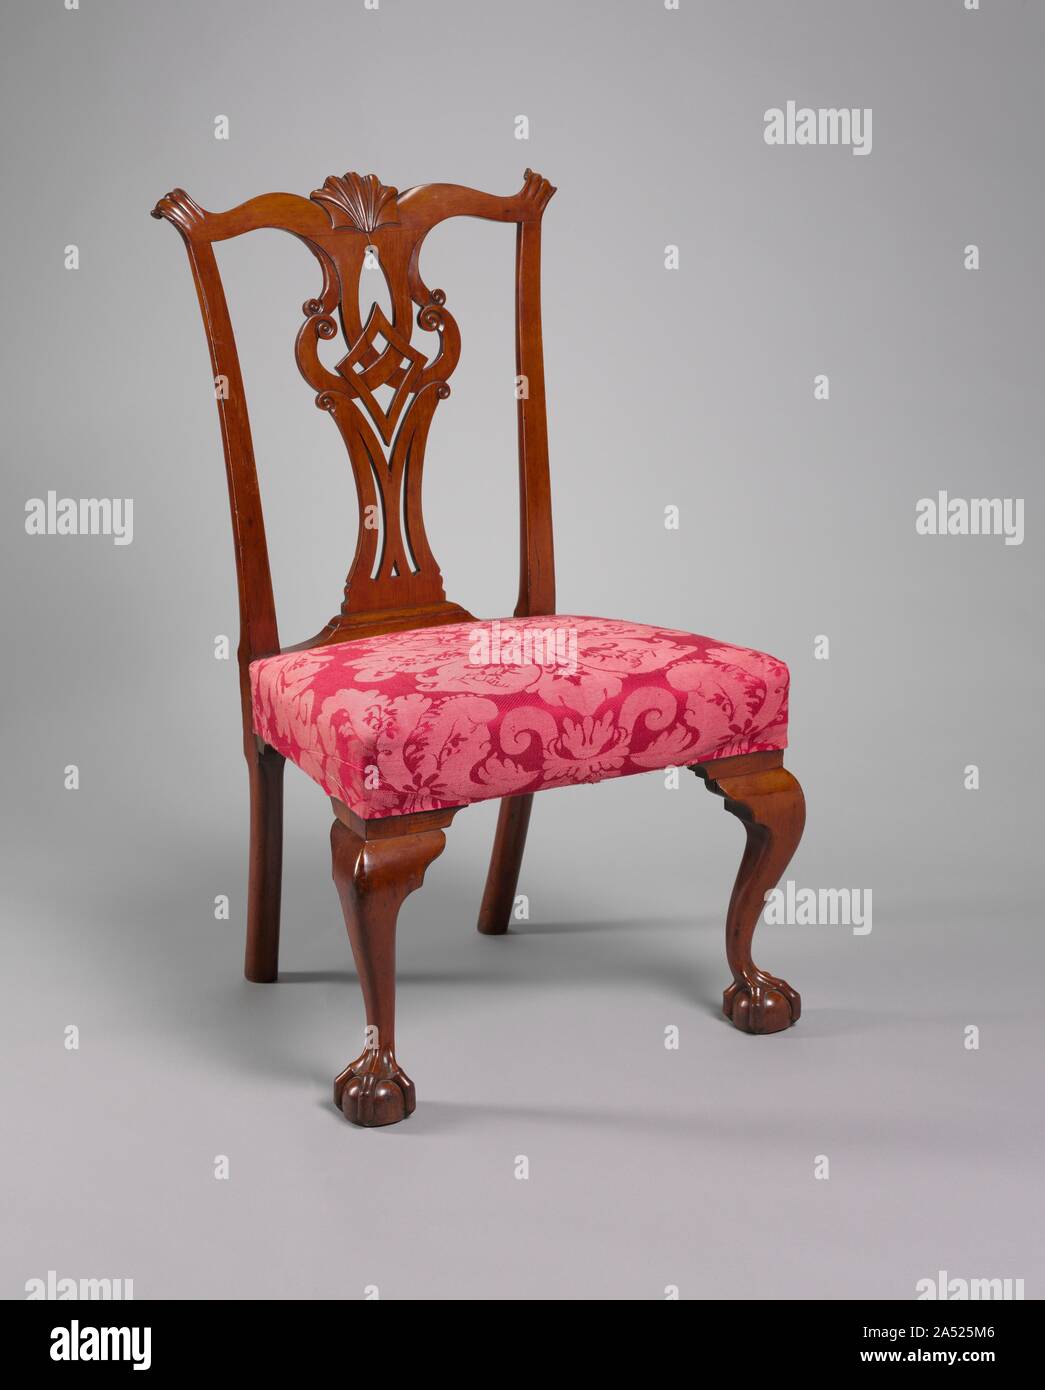 Side Chair, c. 1775. Before becoming one of the best known Connecticut furniture makers of the late 1700s, Eliphalet Chapin worked in New York City and Philadelphia. His furniture shows evidence of that experience. For example, the back of this chair has a splat design found on New York pieces, while the untapered rear legs and the shell carving on the crest rail are typical of Philadelphia workmanship. The use of cherry, however, is characteristic of Connecticut furniture. This chair comes from a set recorded in Chapin's account book as having been supplied to Ebenezer Grant to form part of t Stock Photo